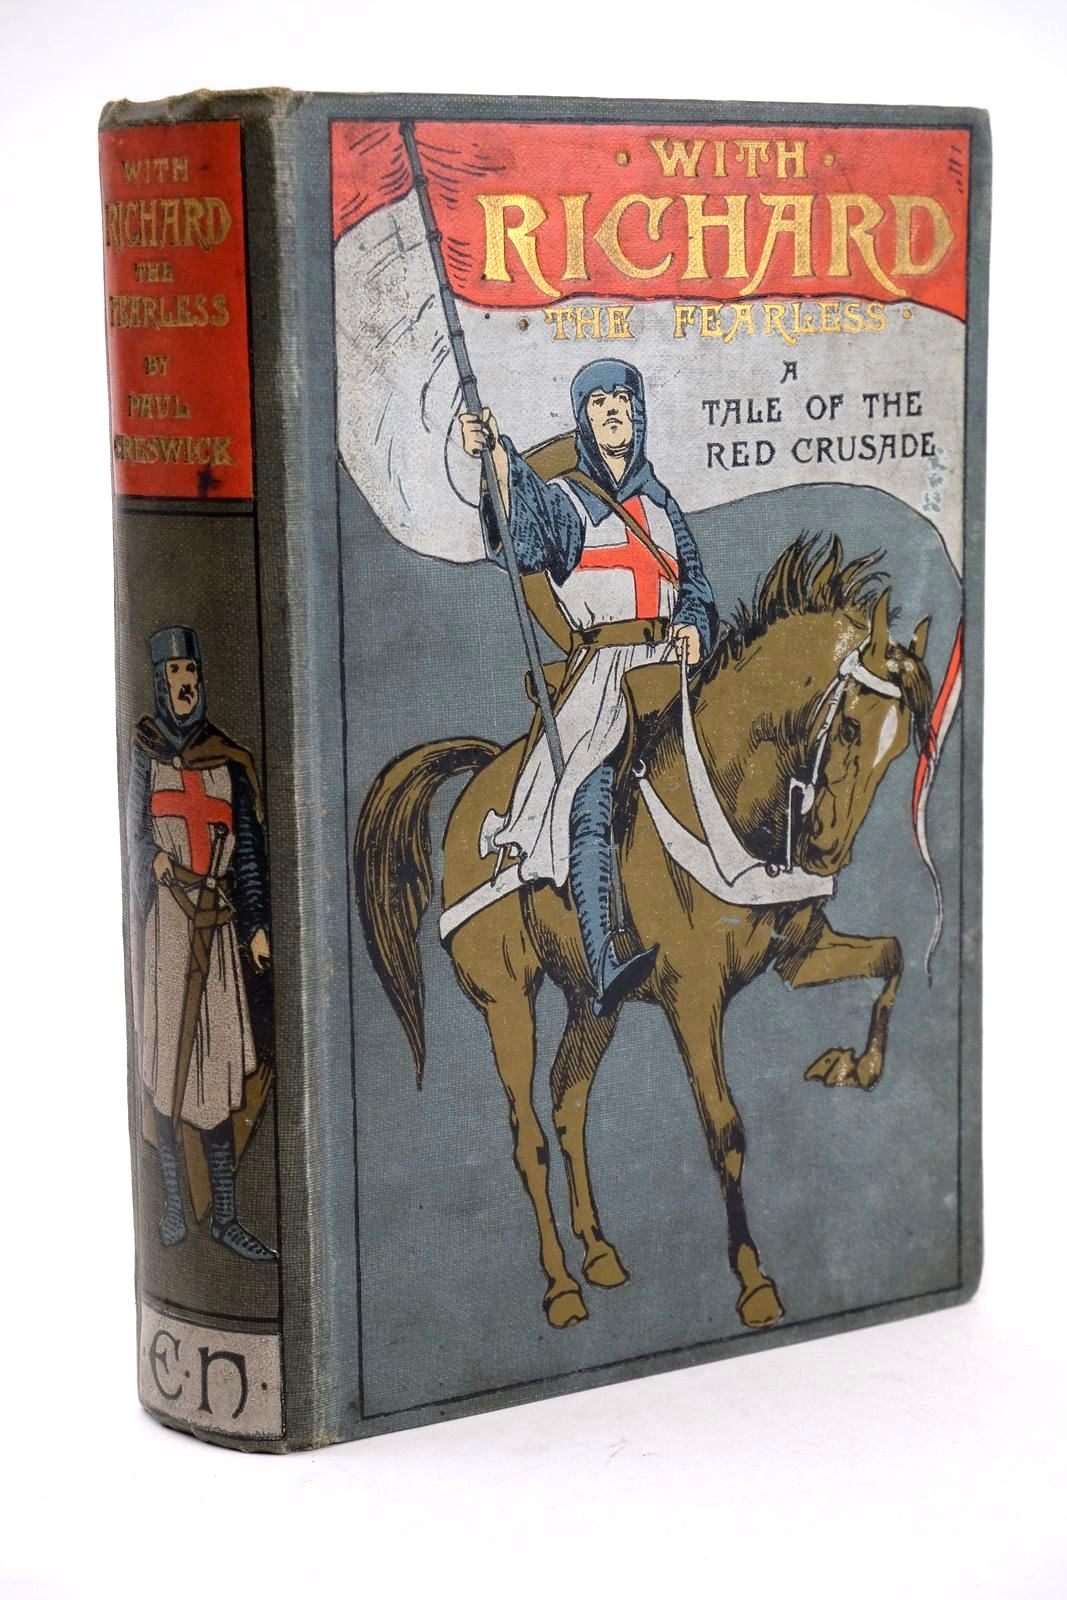 Photo of WITH RICHARD THE FEARLESS written by Creswick, Paul illustrated by Crocket, H. published by Ernest Nister (STOCK CODE: 1324059)  for sale by Stella & Rose's Books